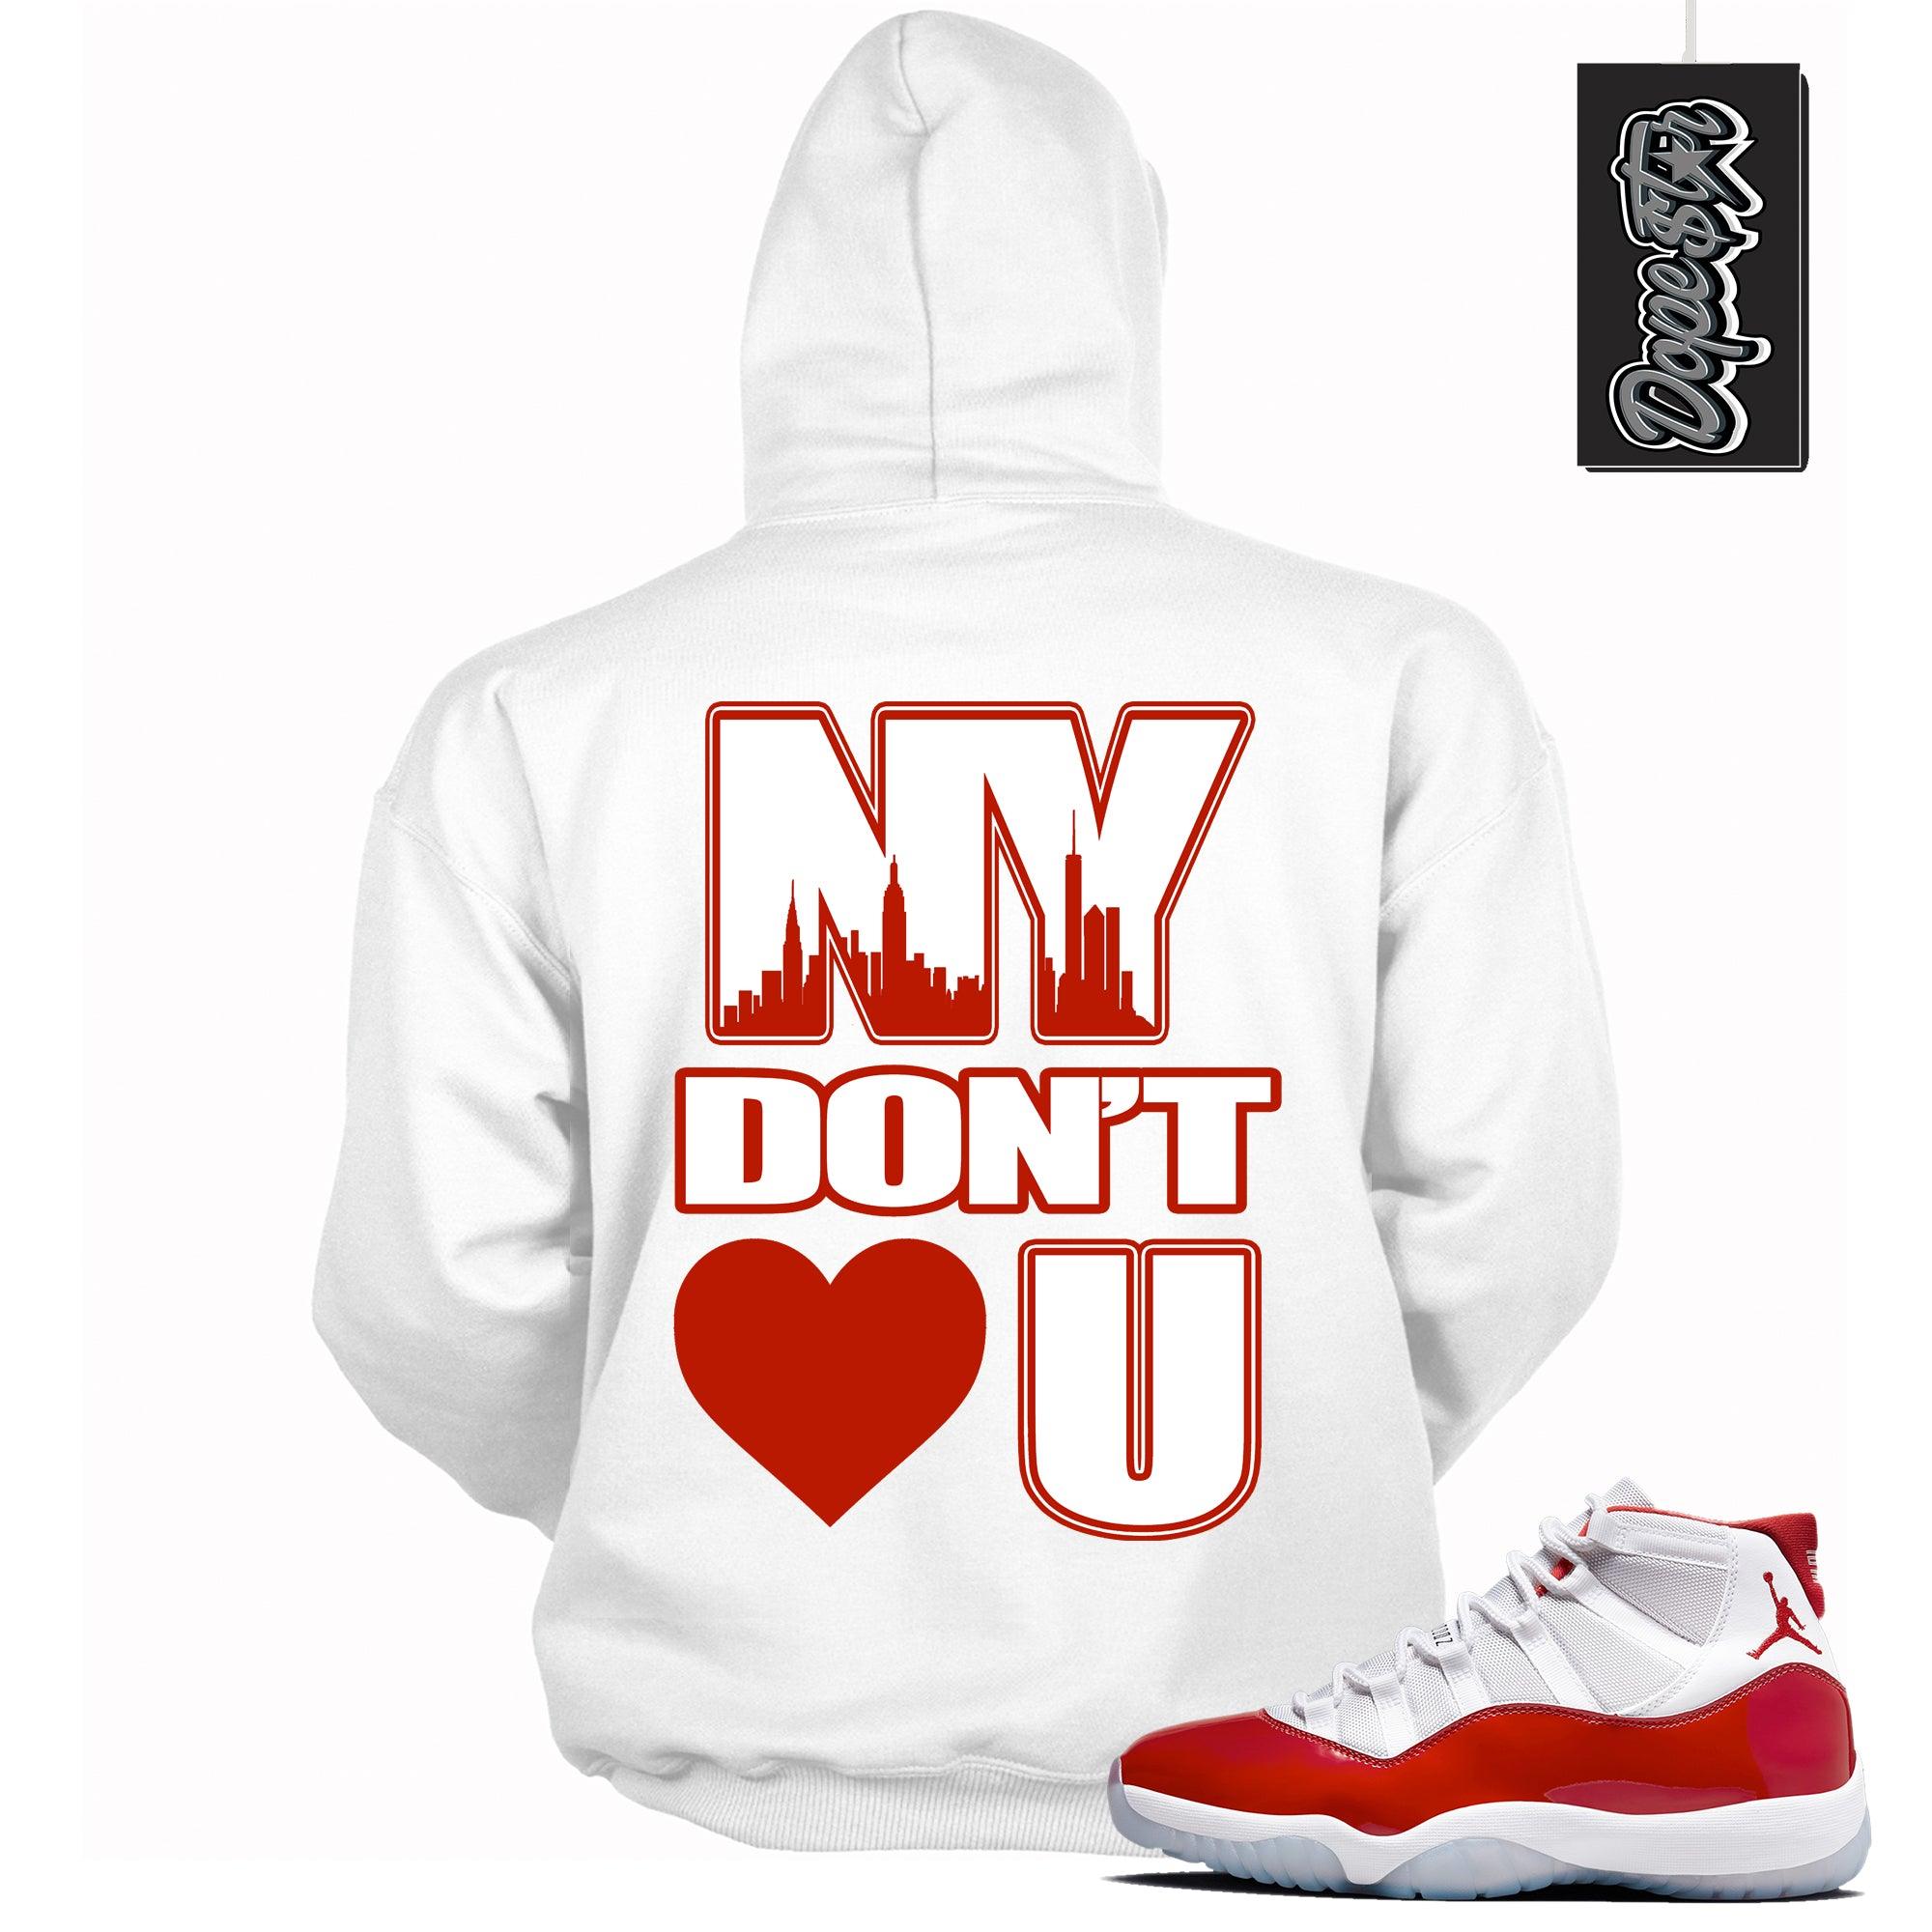 Cool White Graphic Hoodie with “ NY Don’t Love U “ print, that perfectly matches Air Jordan 11 Cherry sneakers